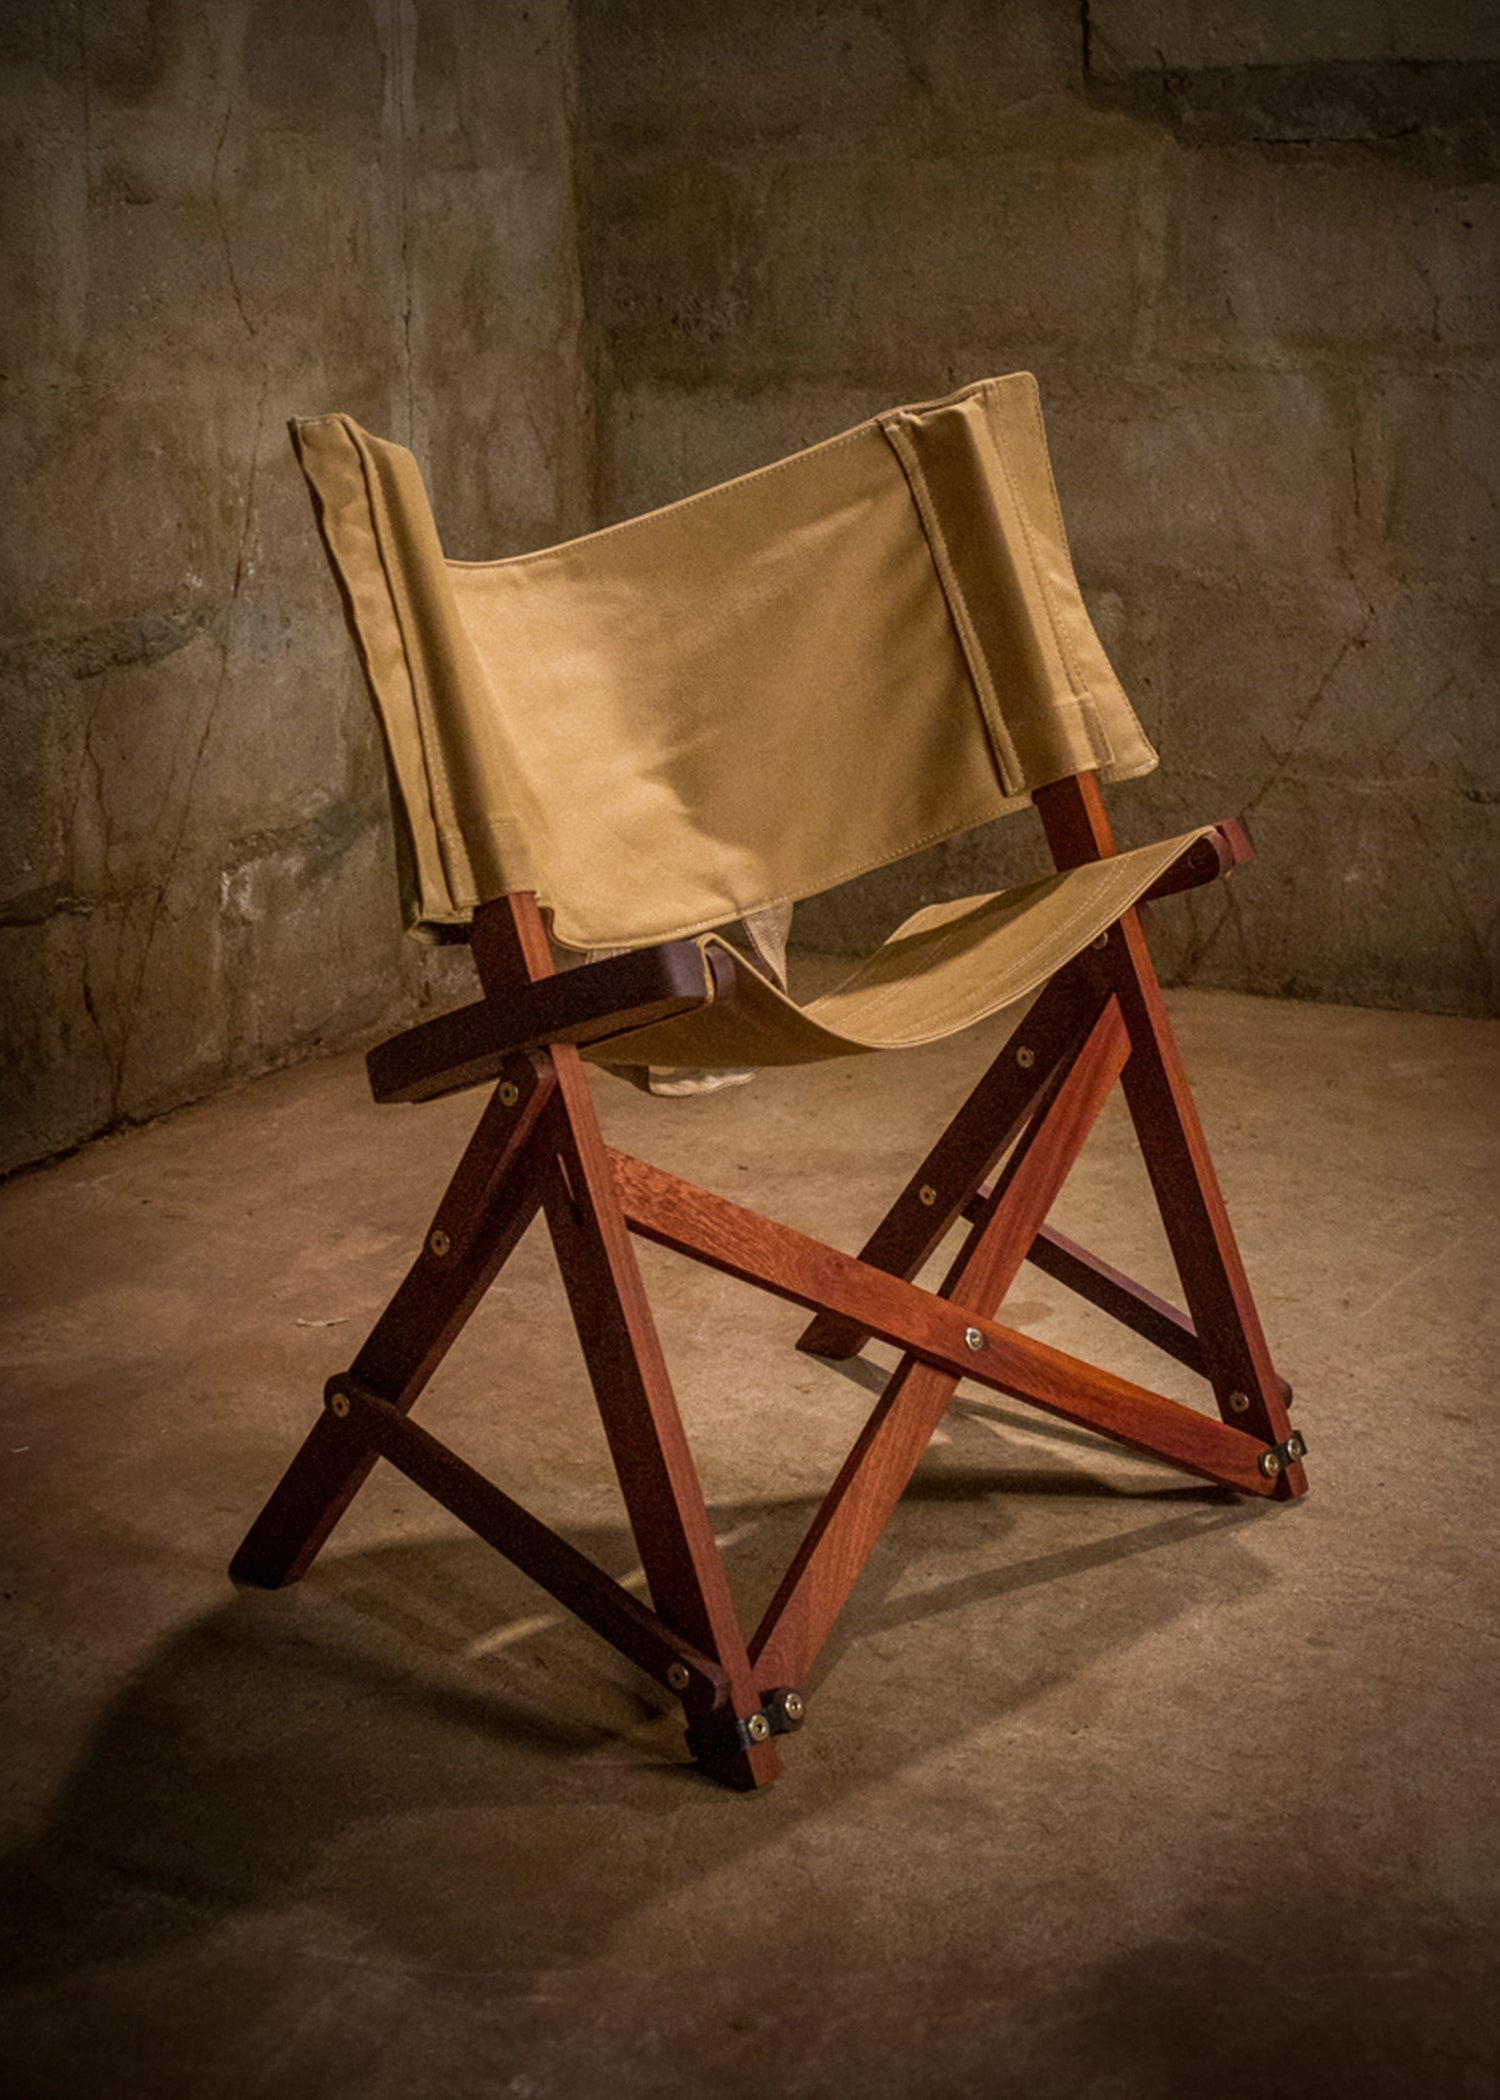 Classic Safari chair crafted with a rich mahogany wood frame and a khaki canvas seat and backrest, set in an ambient room with a textured concrete wall, exuding timeless style and handcrafted quality.